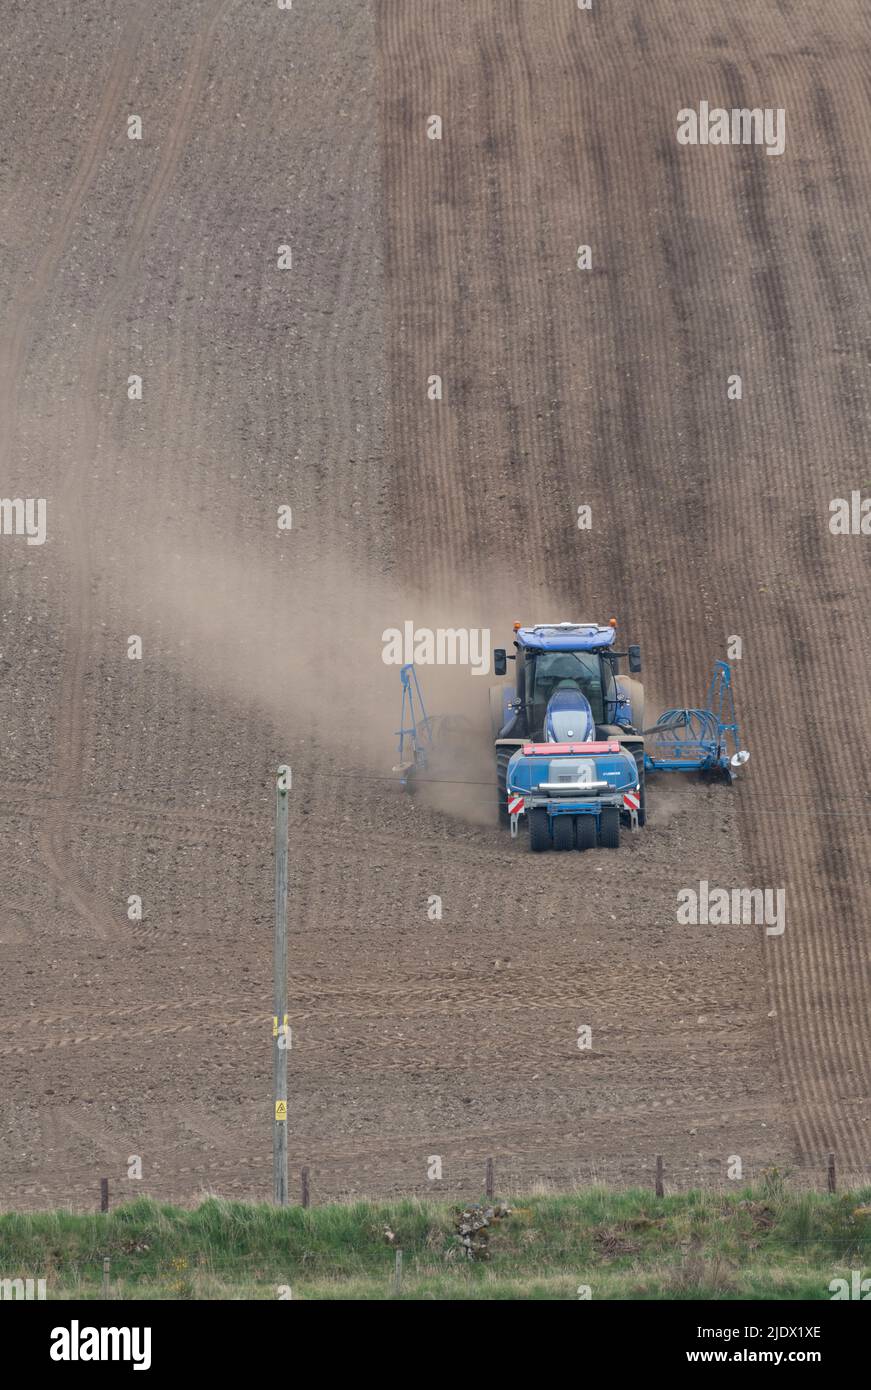 A Front View of a Blue Tractor with a Lemken Seed Drill Sowing Spring Barley as it Heads Down a Hillside Field in Clouds of Dust Stock Photo